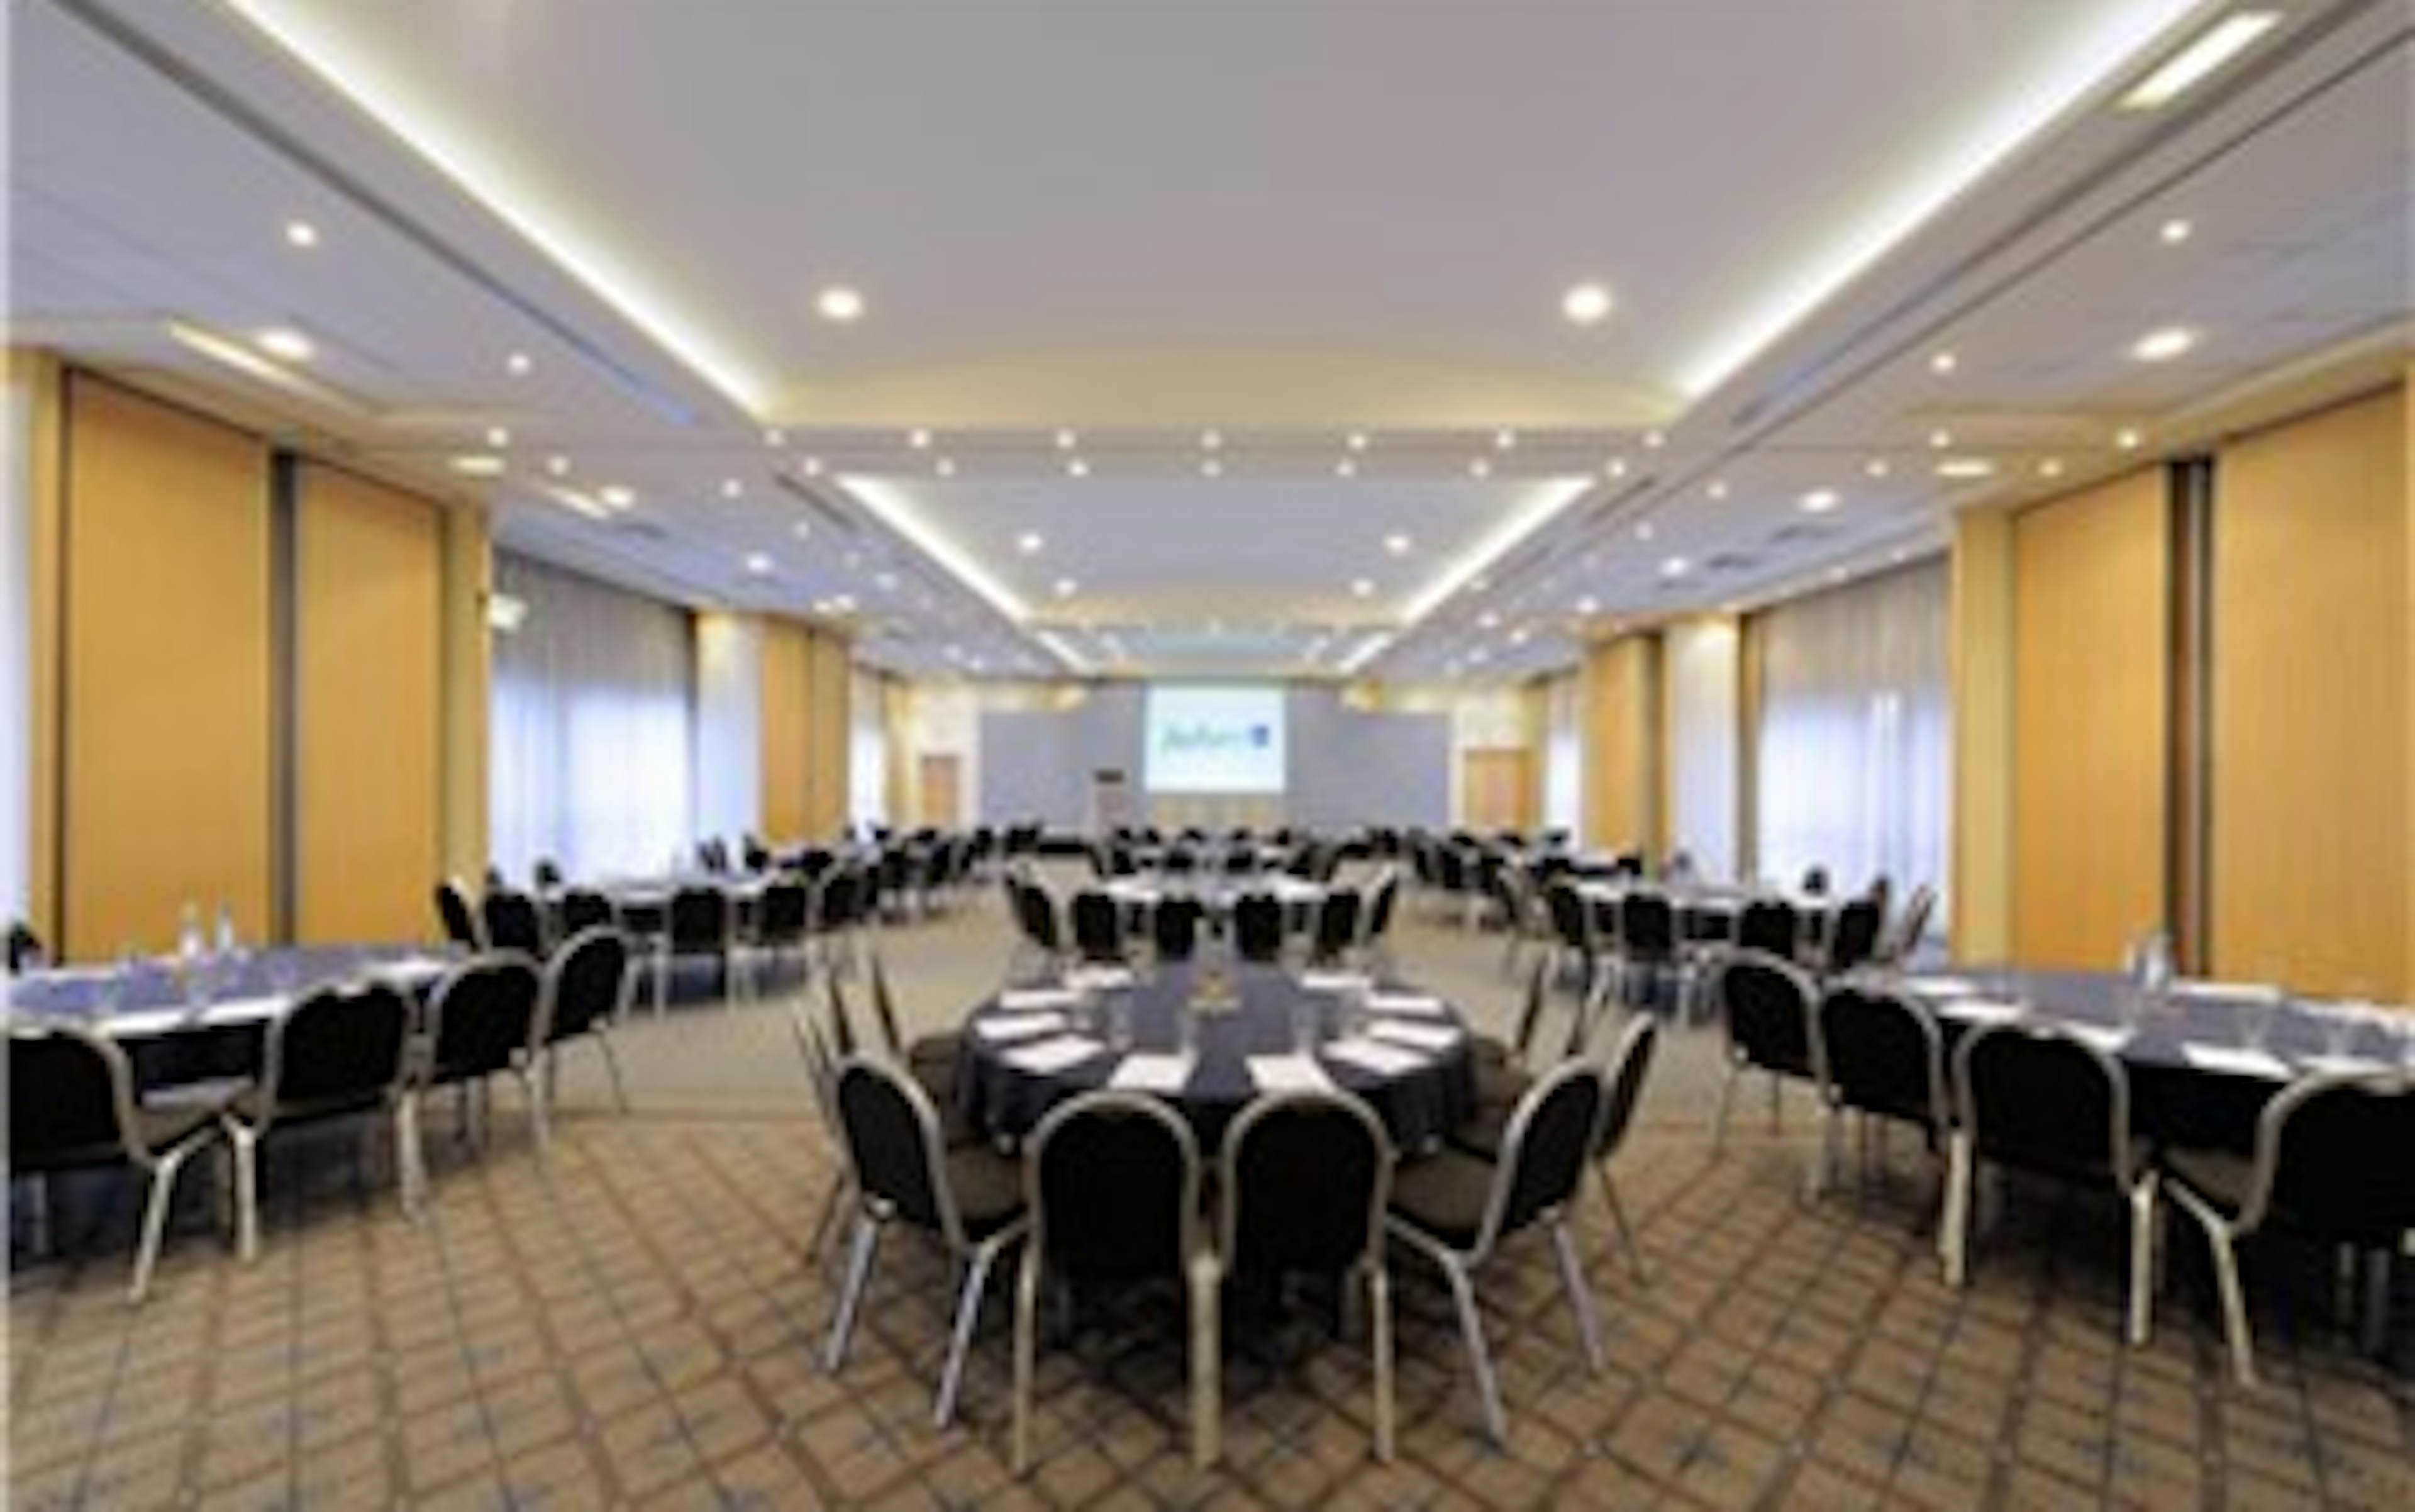 Radisson Blu Manchester Airport - Brussels Suite image 1